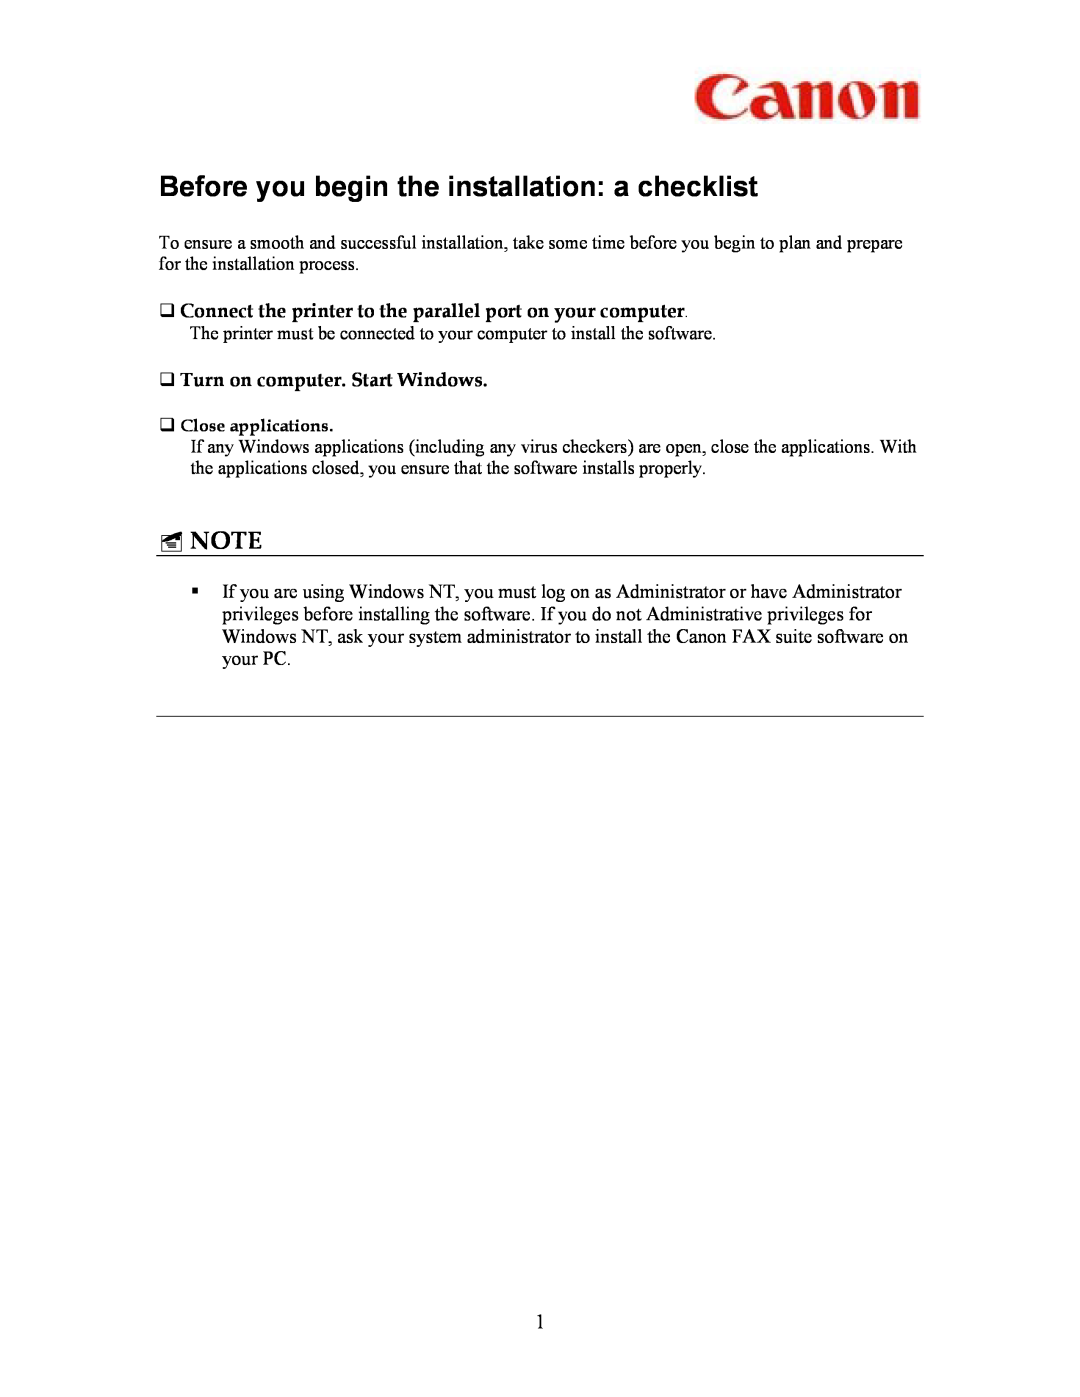 Canon FAX-L350 manual Before you begin the installation a checklist, ‰ Turn on computer. Start Windows 